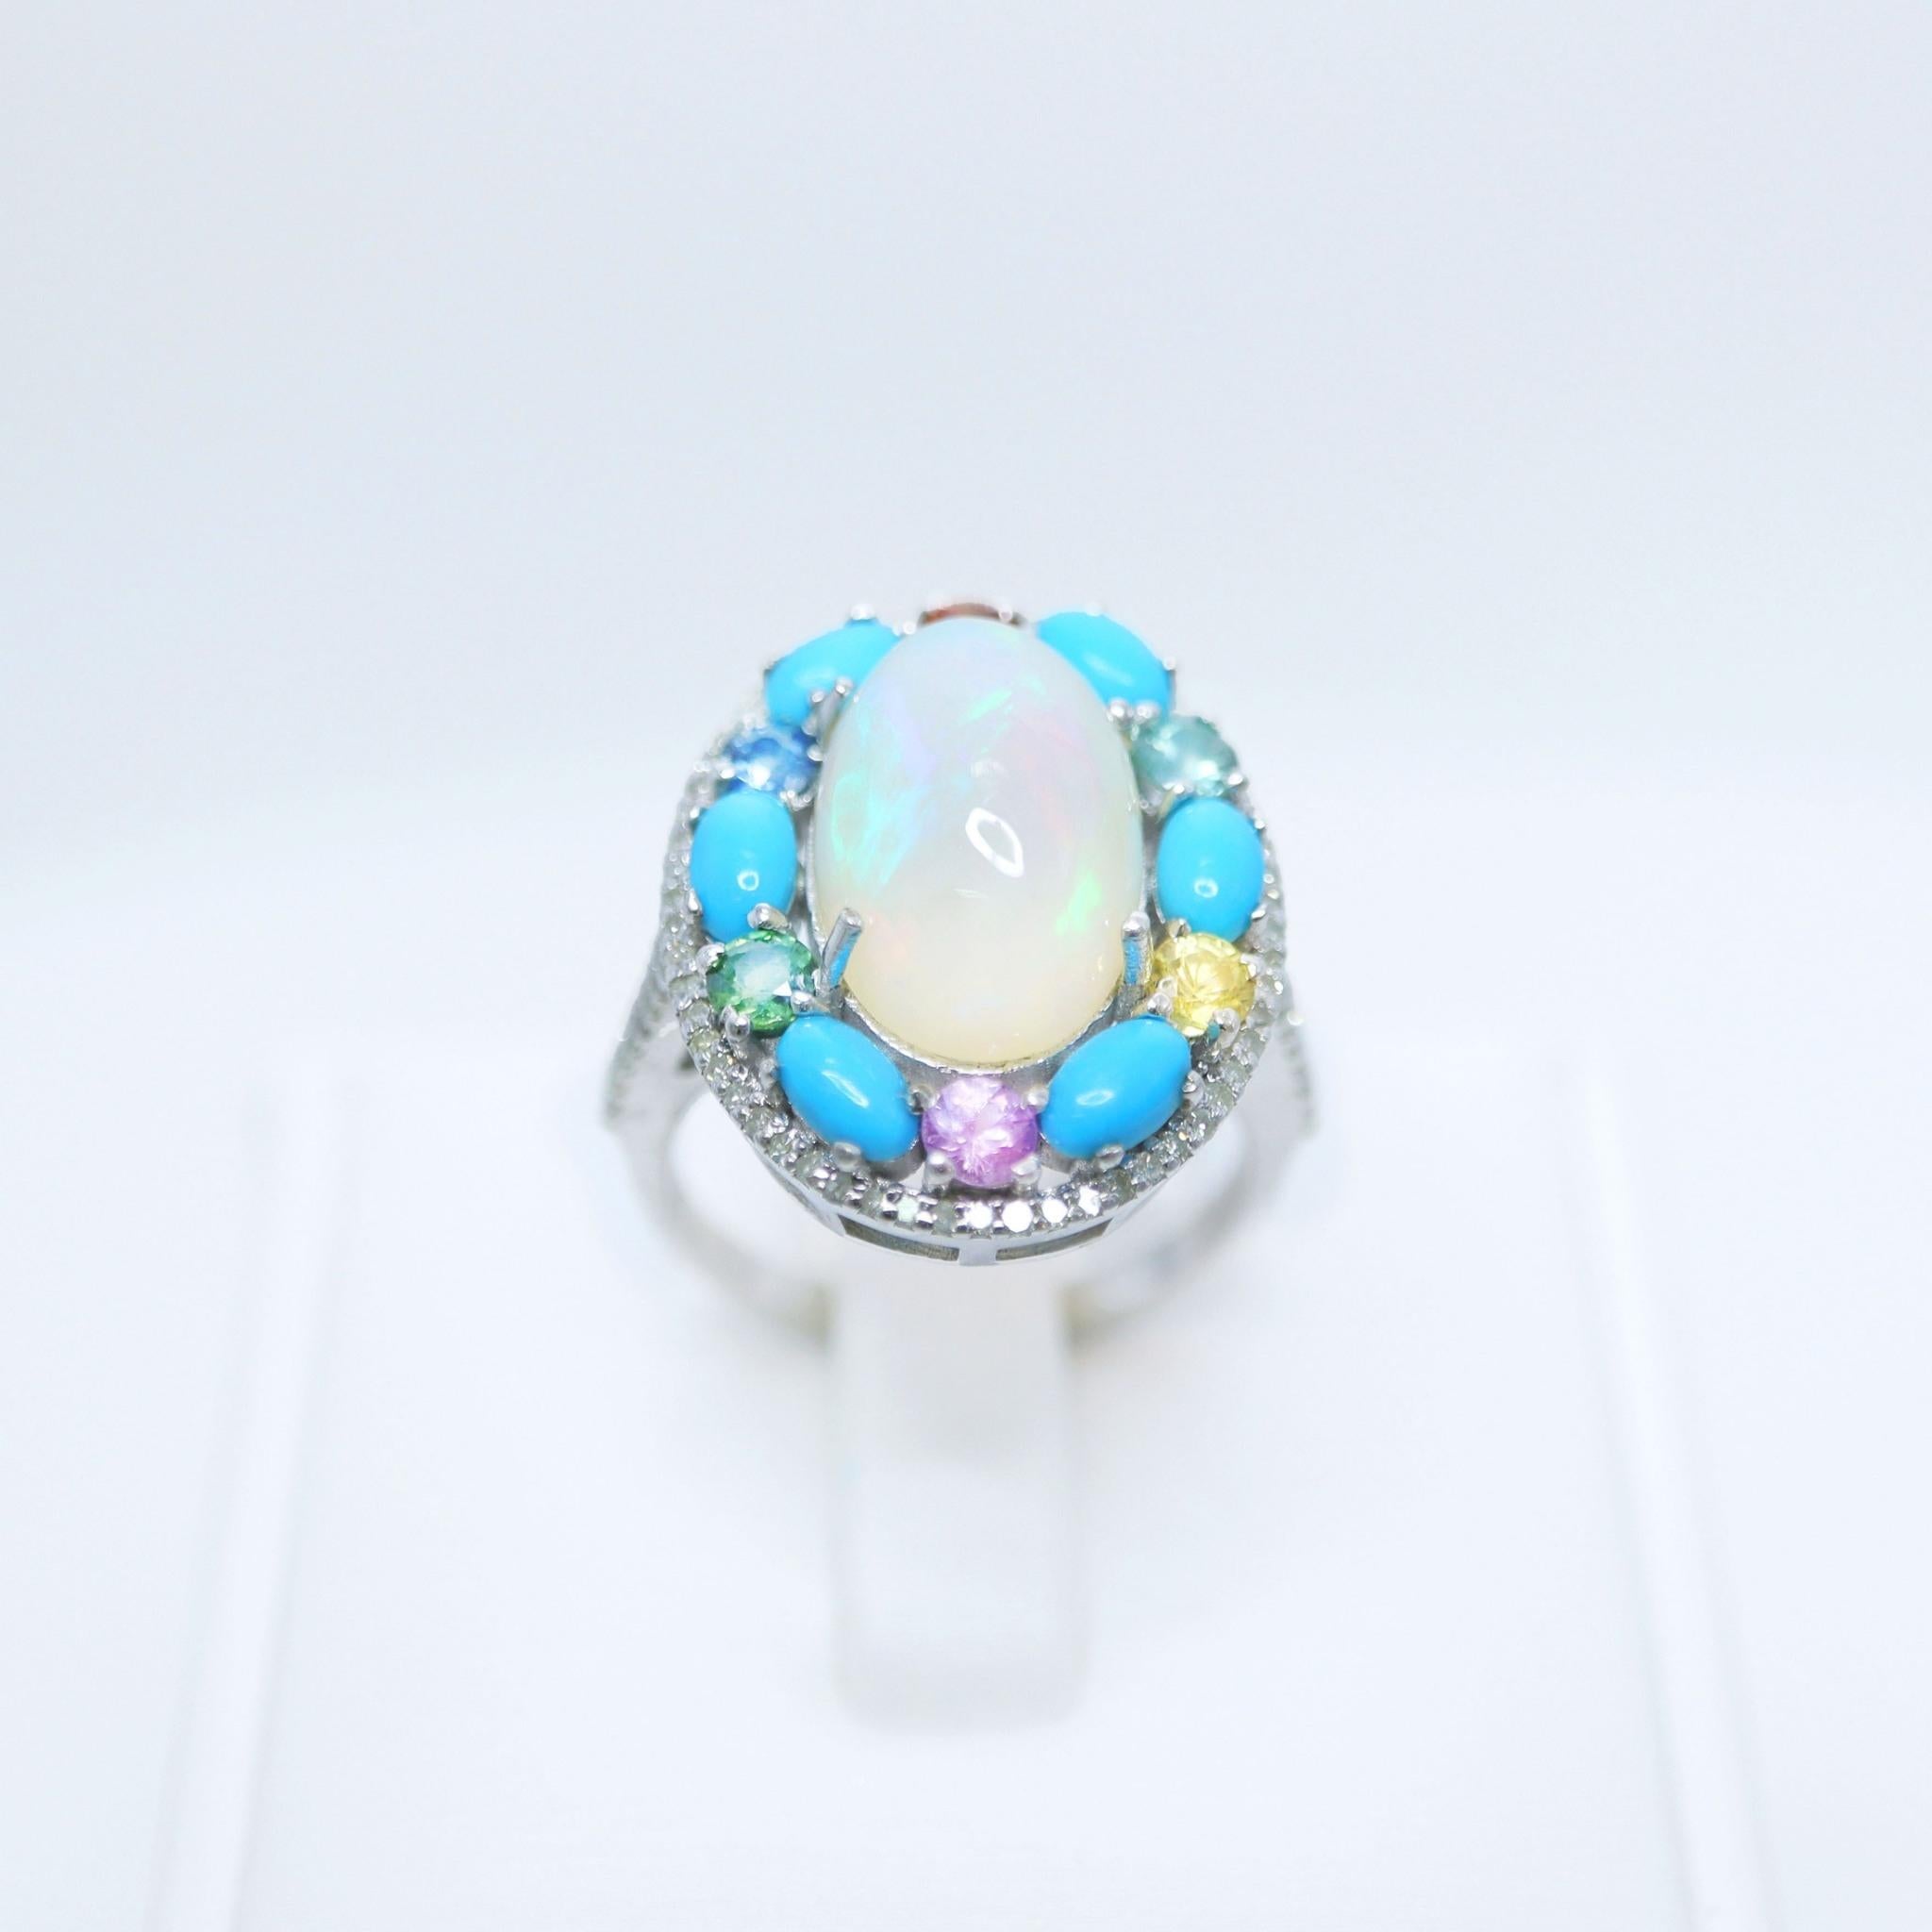 *Silver 4.35 ct  Natural Color Play Opal Diamonds Antique Engagement Ring*
This ring features a 4.35-carat natural white Opal with a color-play effect. It is set on a silver band and accented with natural HI SI diamonds weighing 0.42 carats and